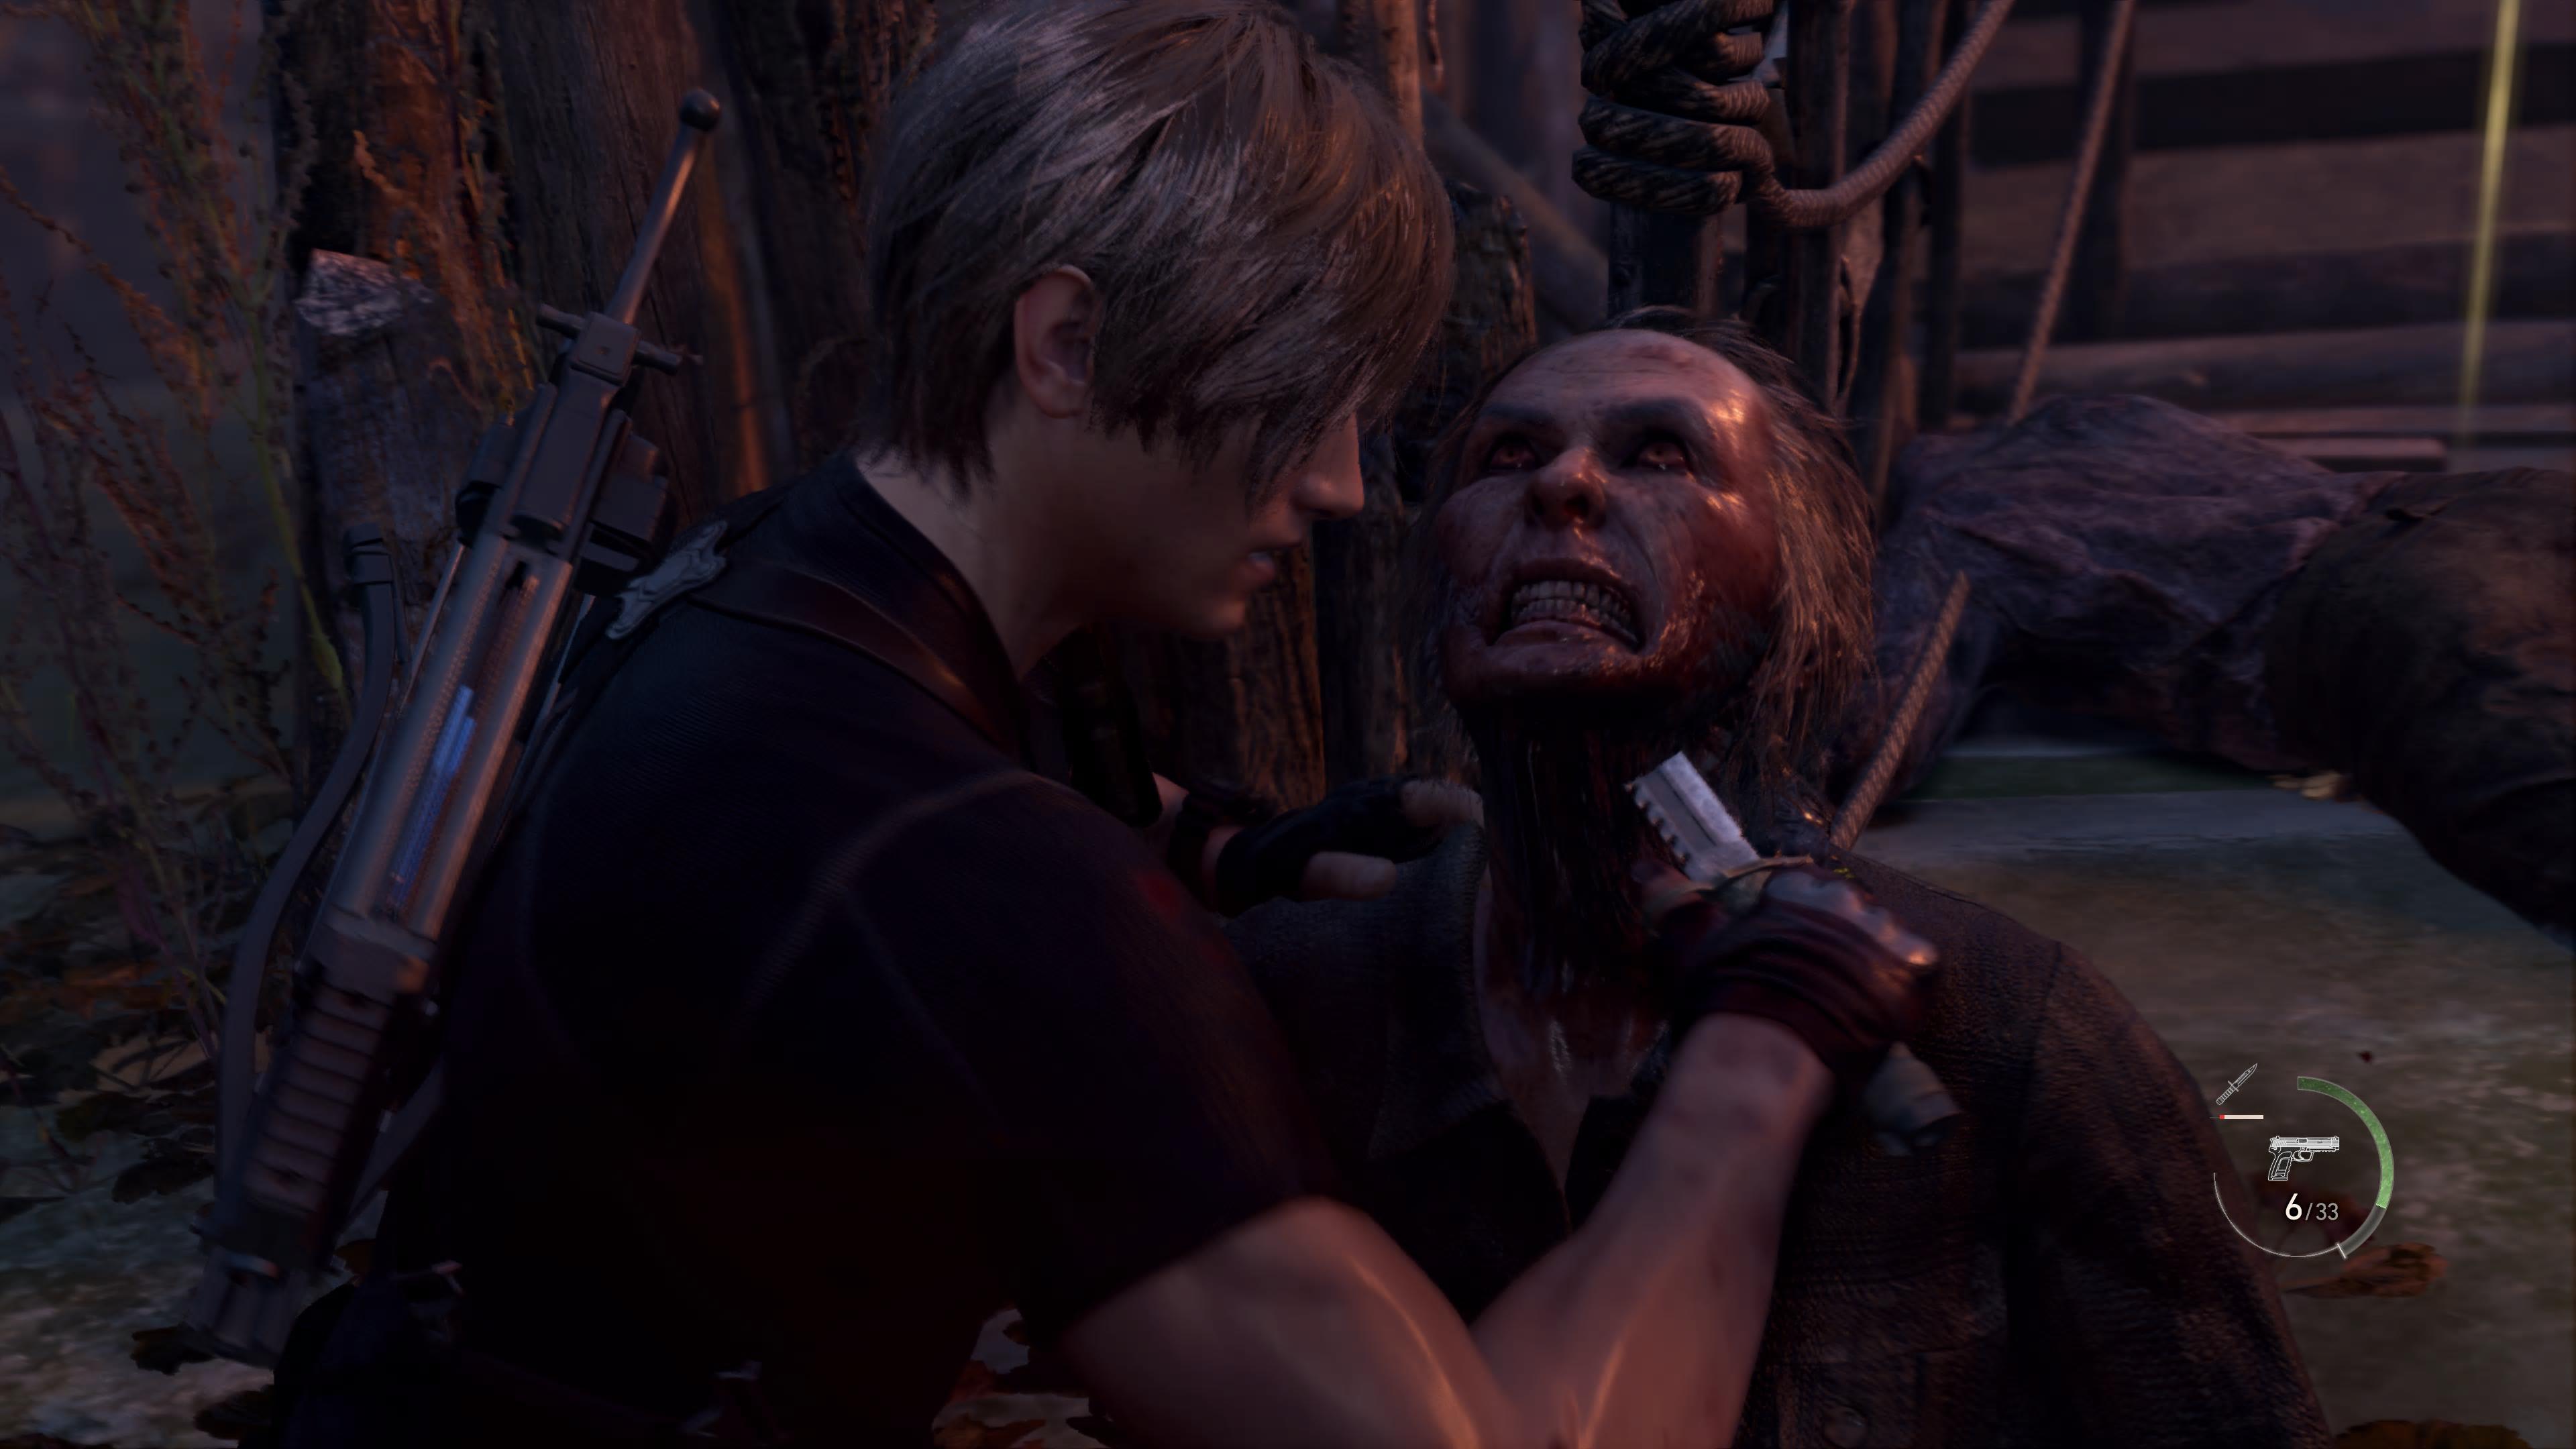 Resident Evil 4: 5 Things The Remake Needs To Change ( & 5 That Should Stay  The Same)